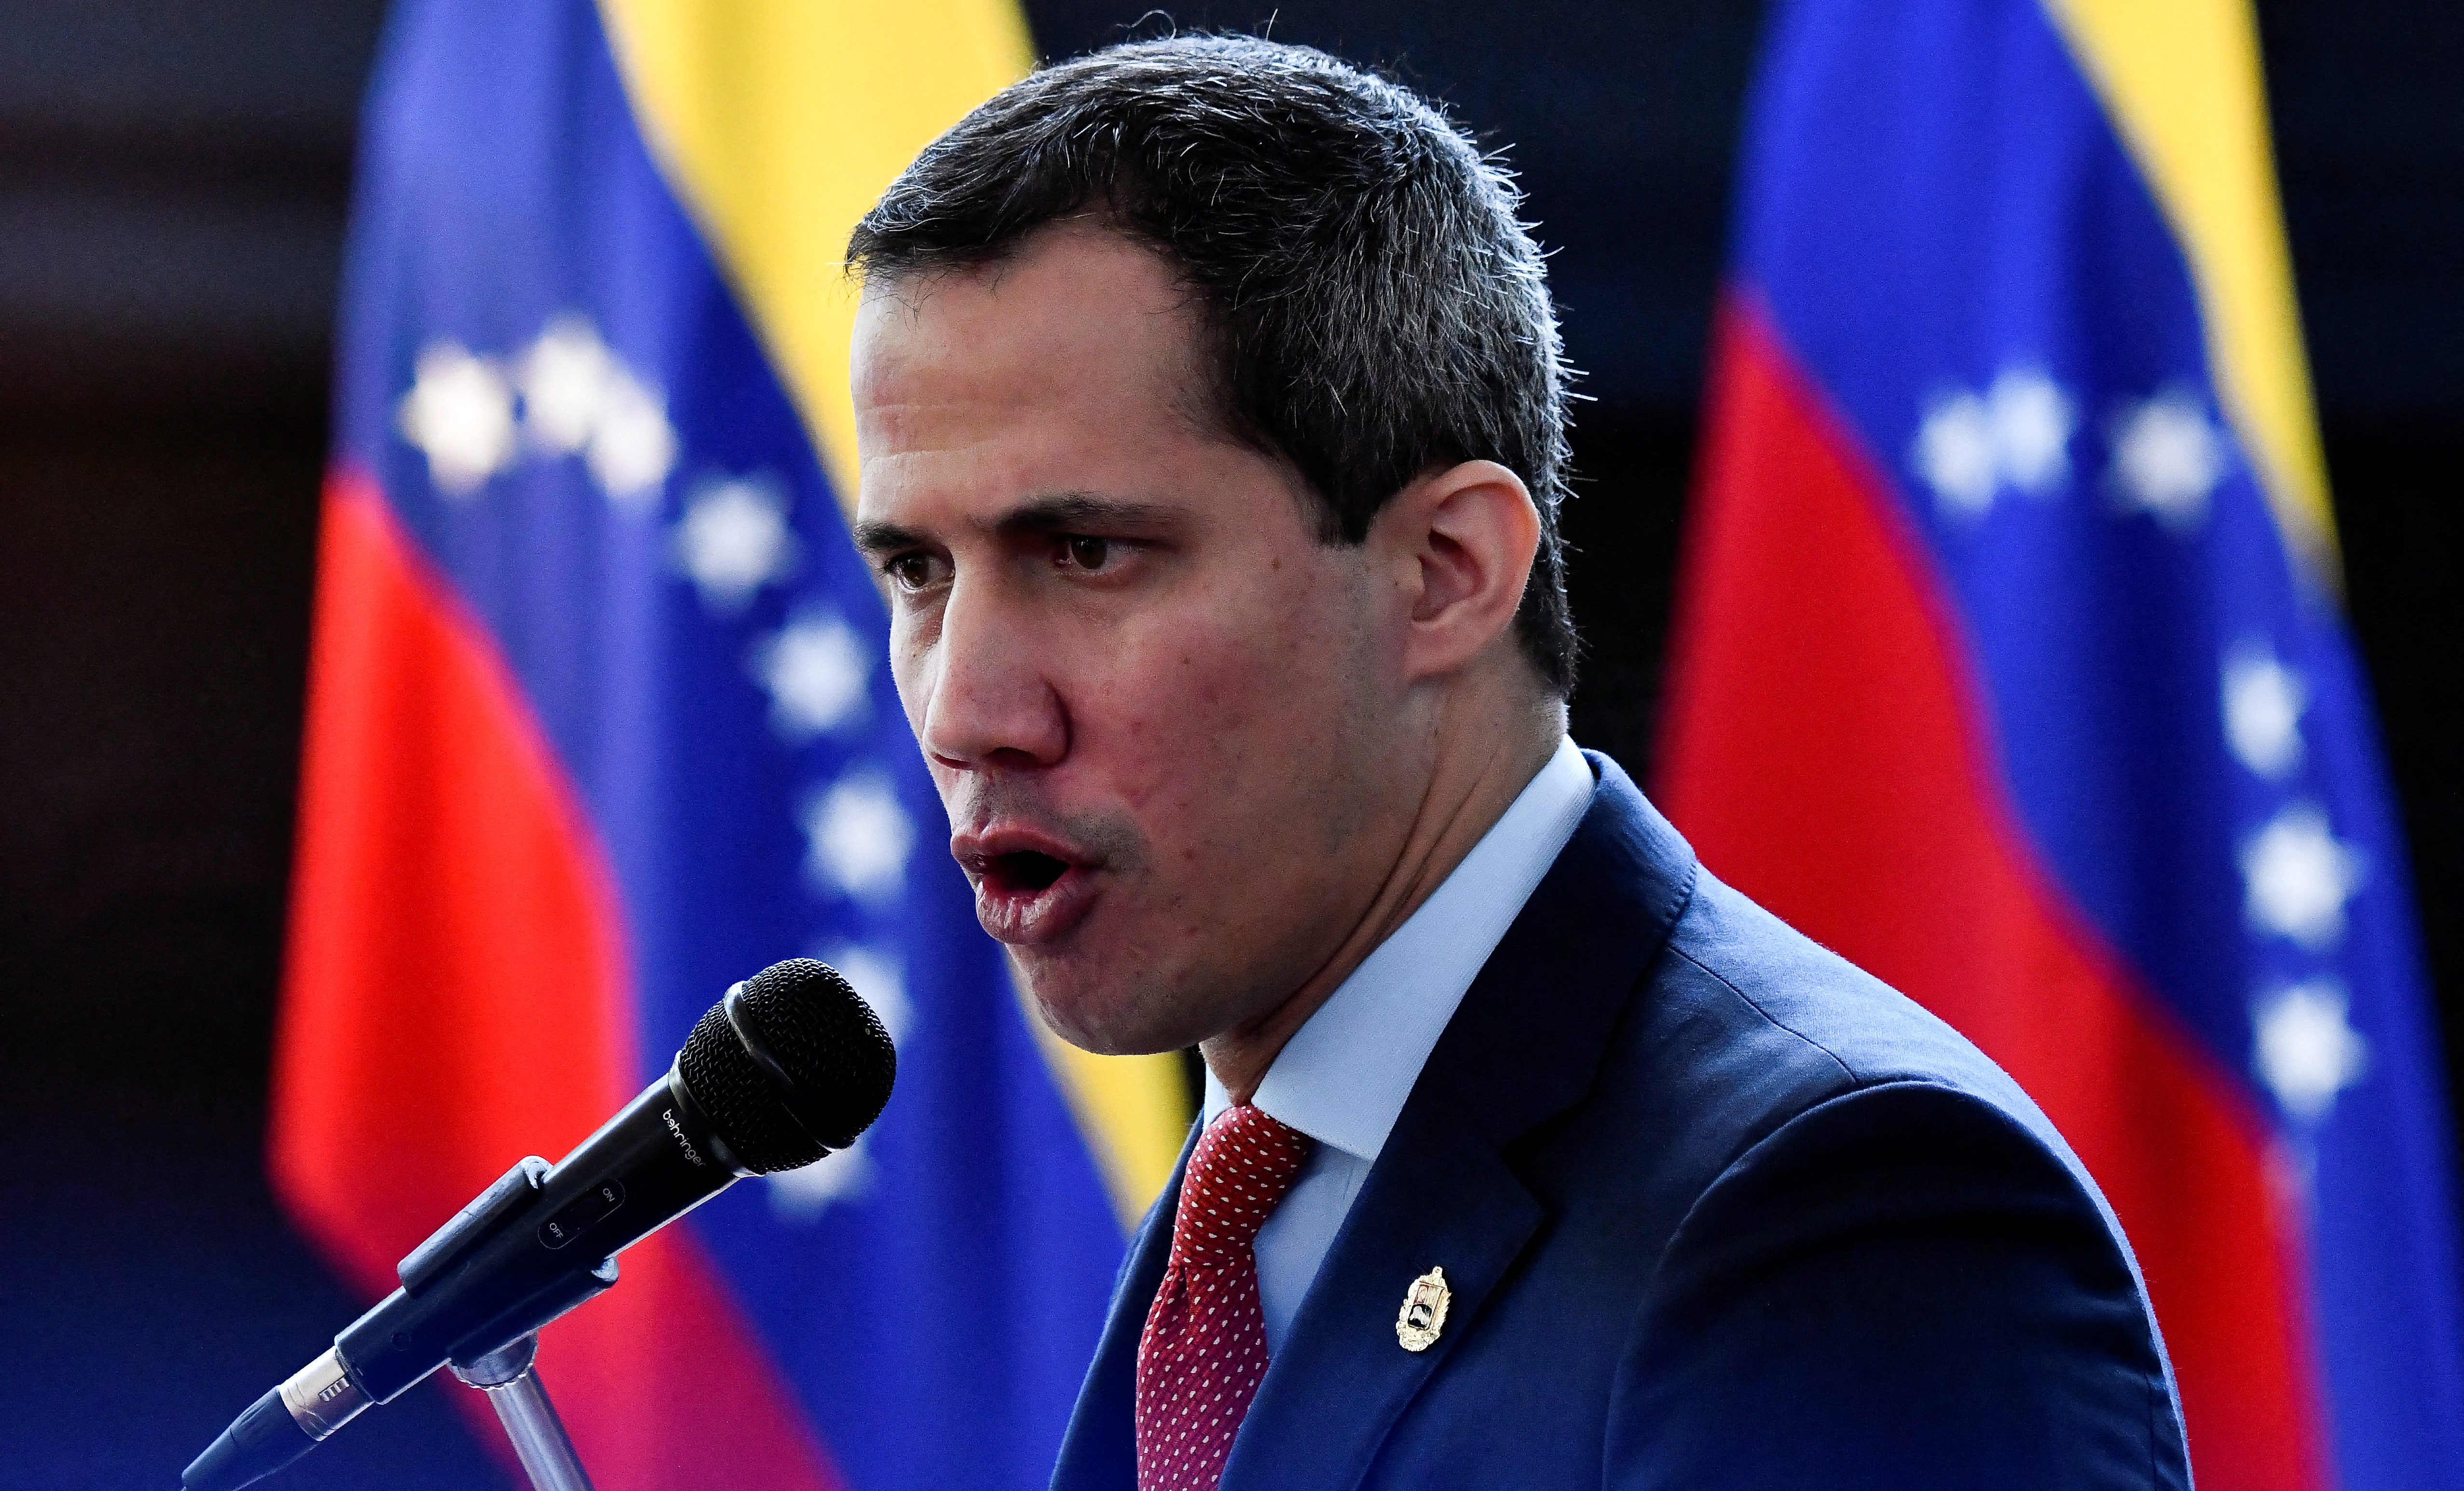 Venezuela's opposition leader Juan Guaido gives a speech during a session of the opposition's assembly, in Caracas